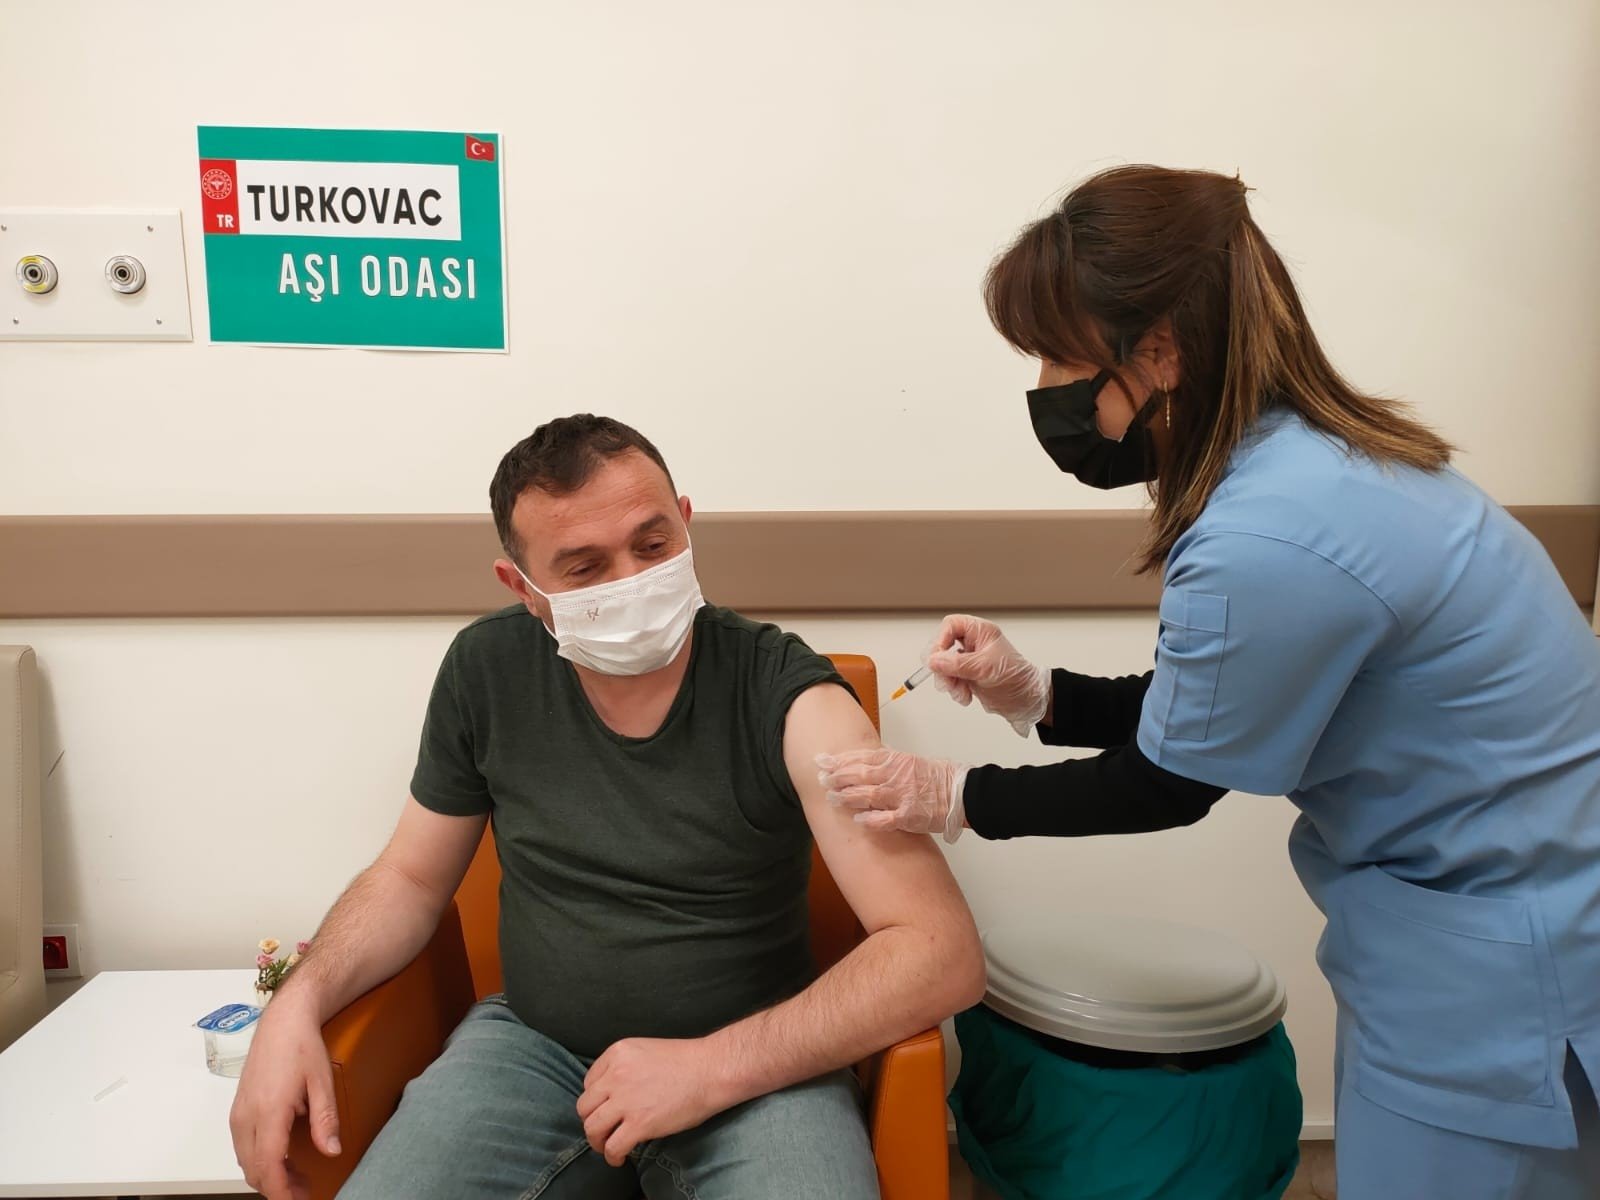 A man gets vaccinated with Turkovac at a hospital, in Giresun, northern Turkey, March 7, 2022. (IHA Photo)